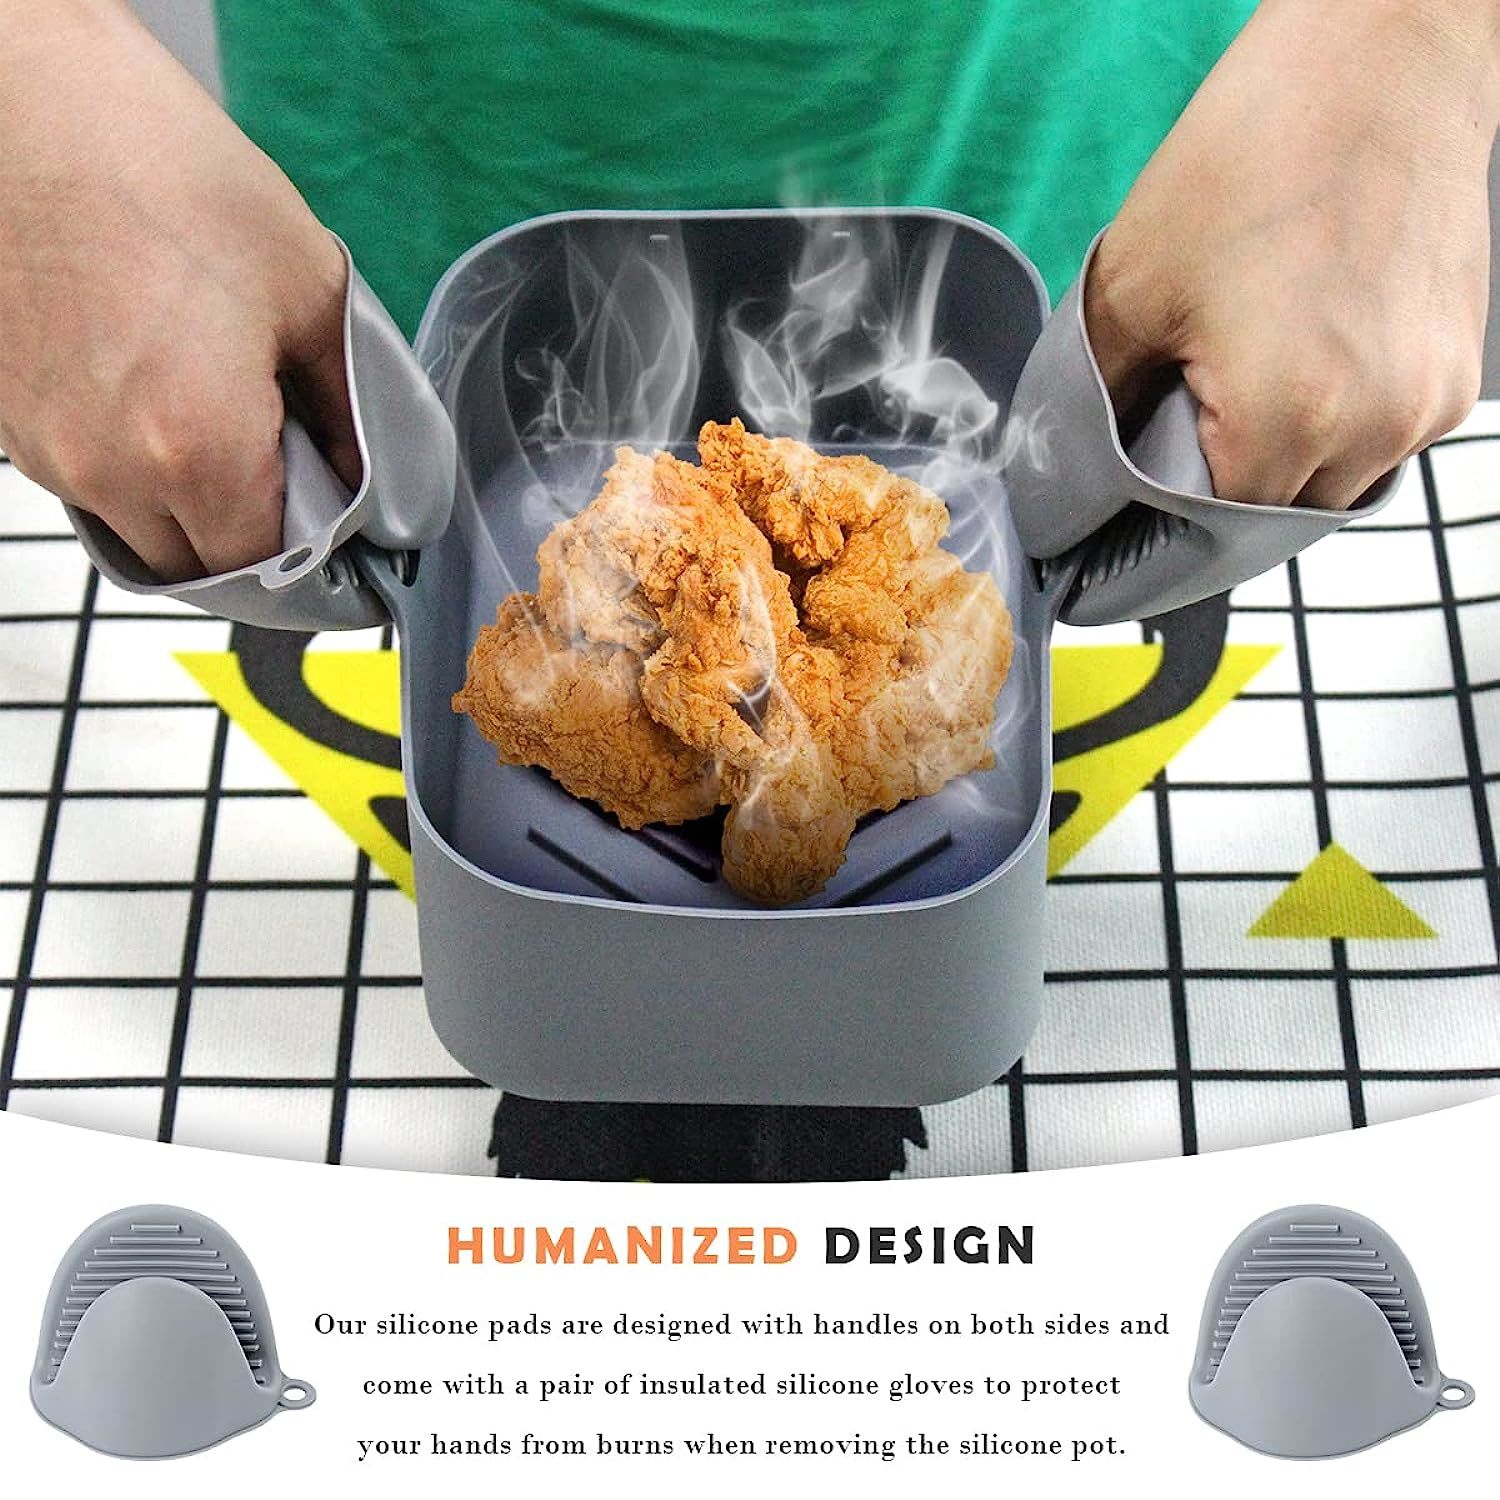 Chefman Disposable, Heat-Resistant Air Fryer Liners, 100 Pack, 9 inch Round